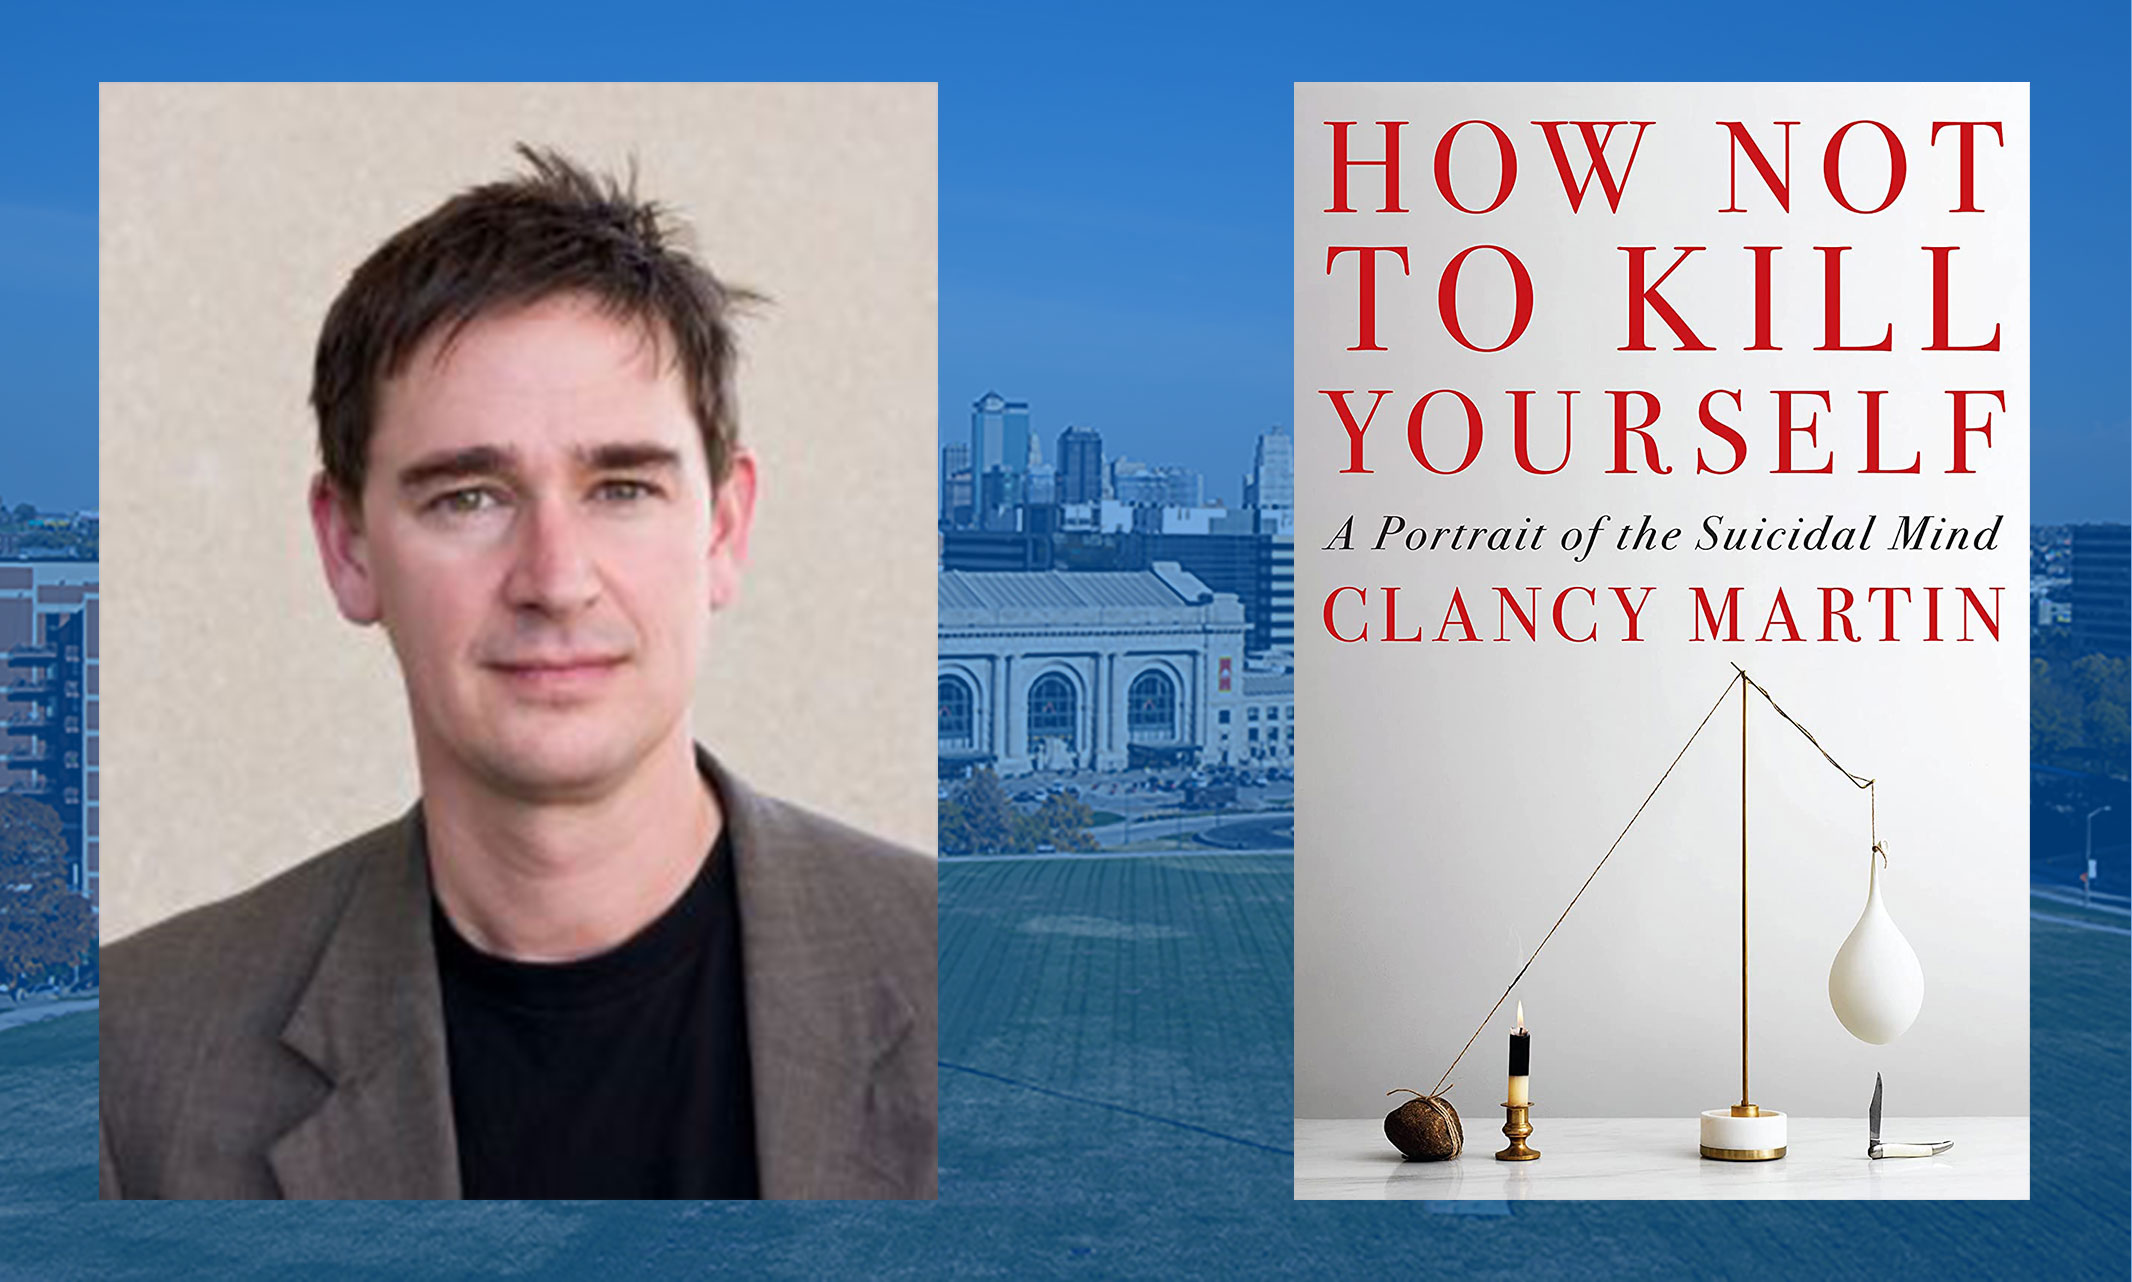 Clancy Martin and his book "How Not to Kill Yourself"